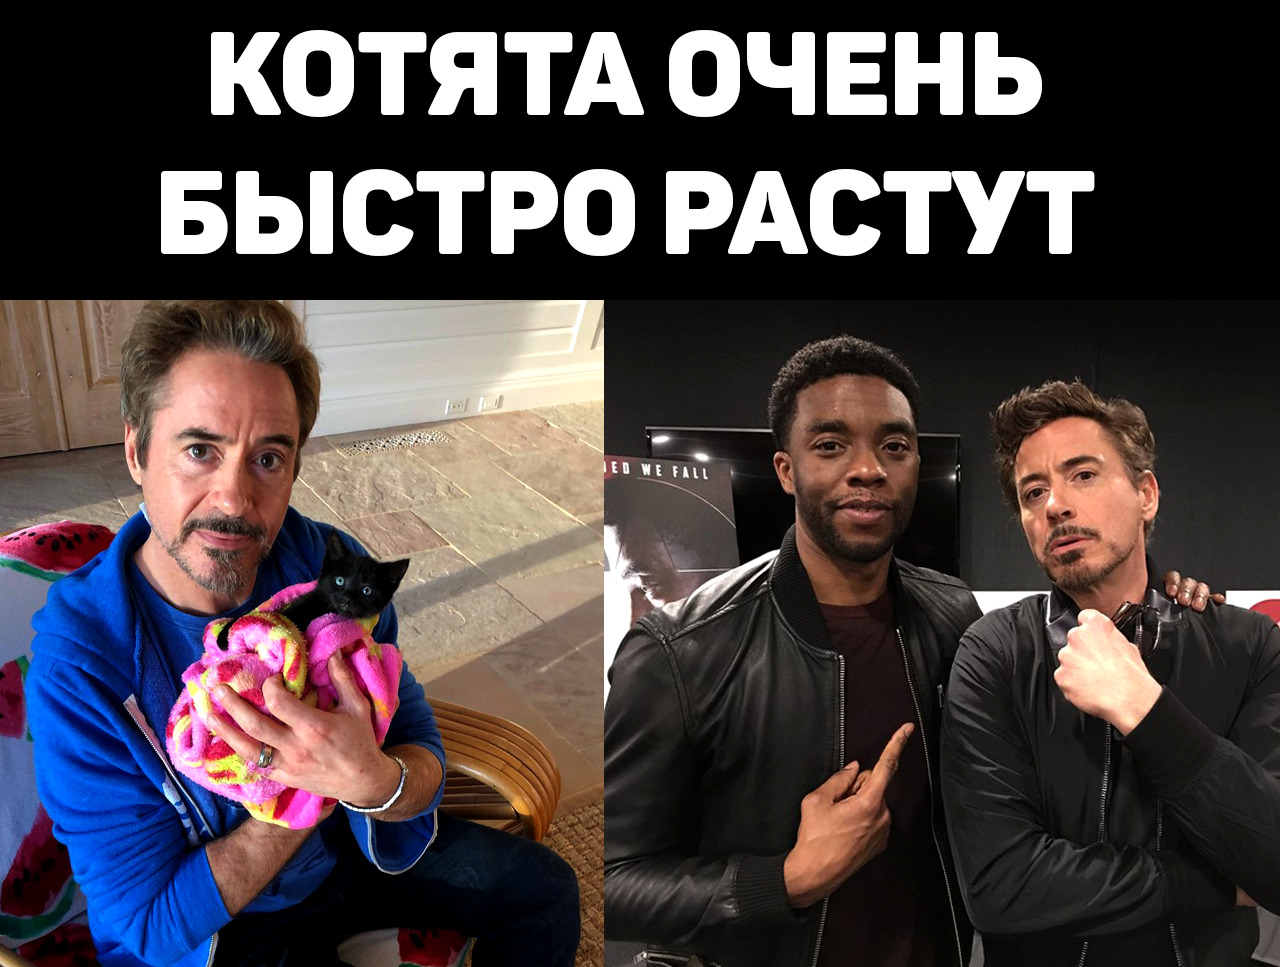 Nice growing up photo. - Black Panther, cat, Chadwick Boseman, Robert Downey the Younger, Marvel, Actors and actresses, Robert Downey Jr.